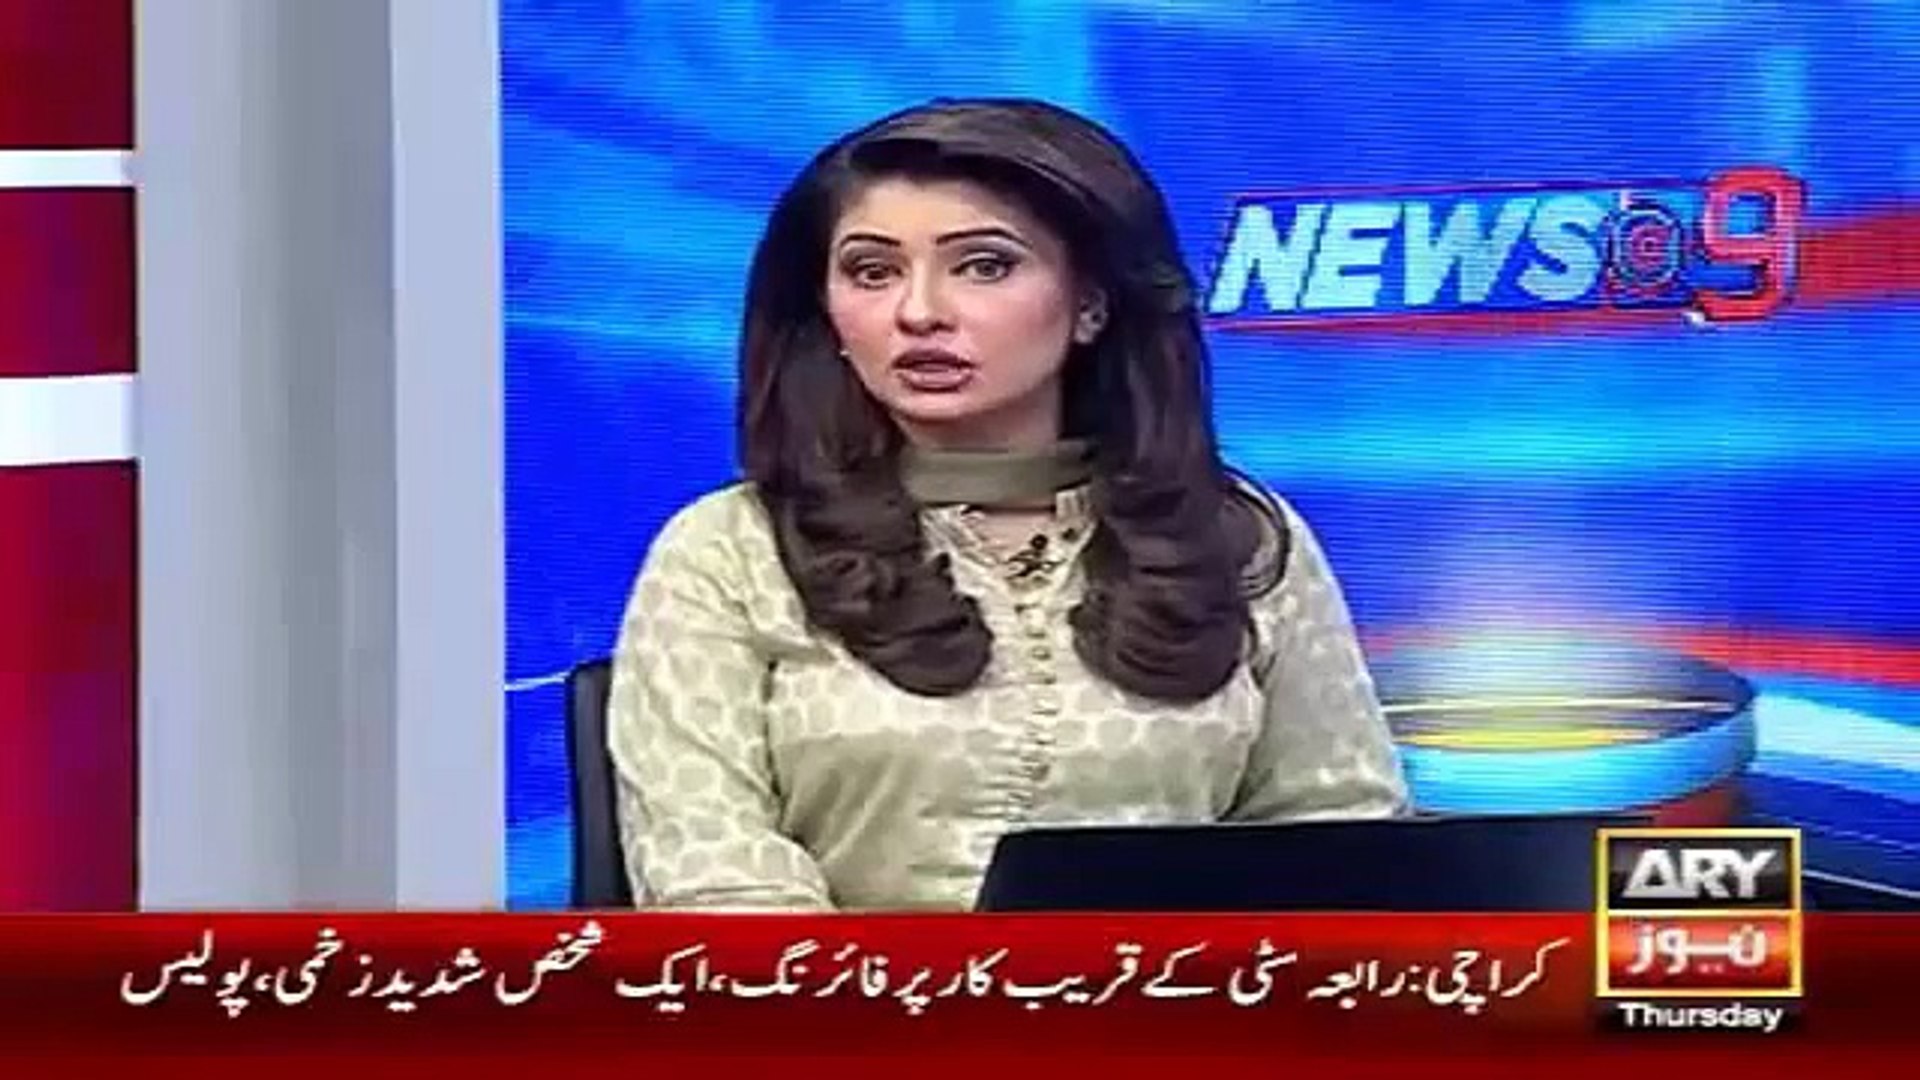 Ary News Headlines 29 January 2016 , Women Safe After Falling From Mountain - Latest News